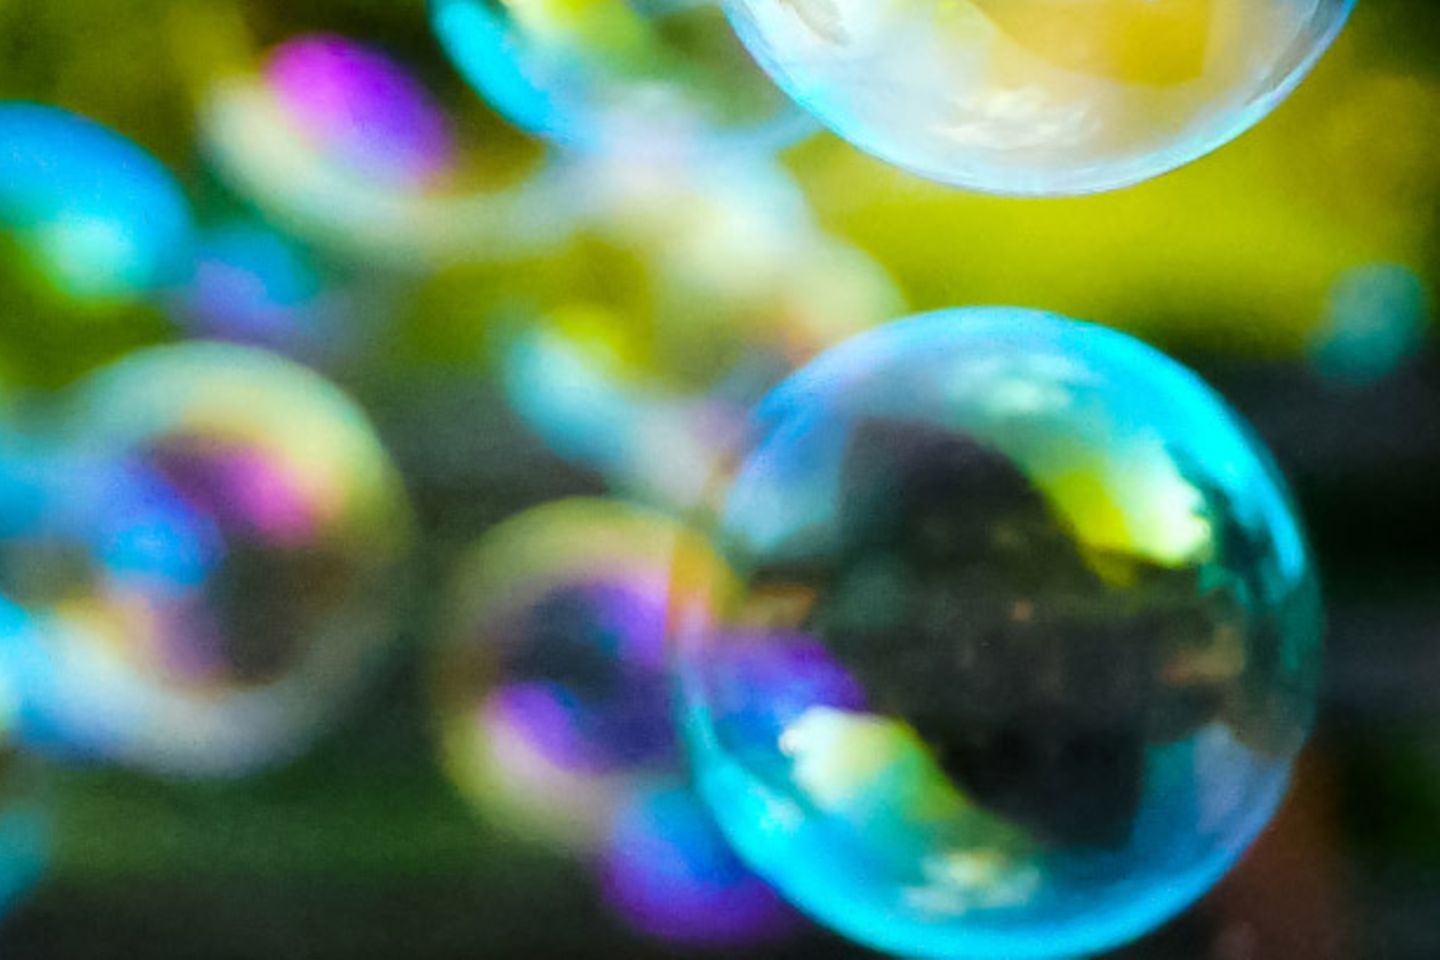 Many colourful bubbles